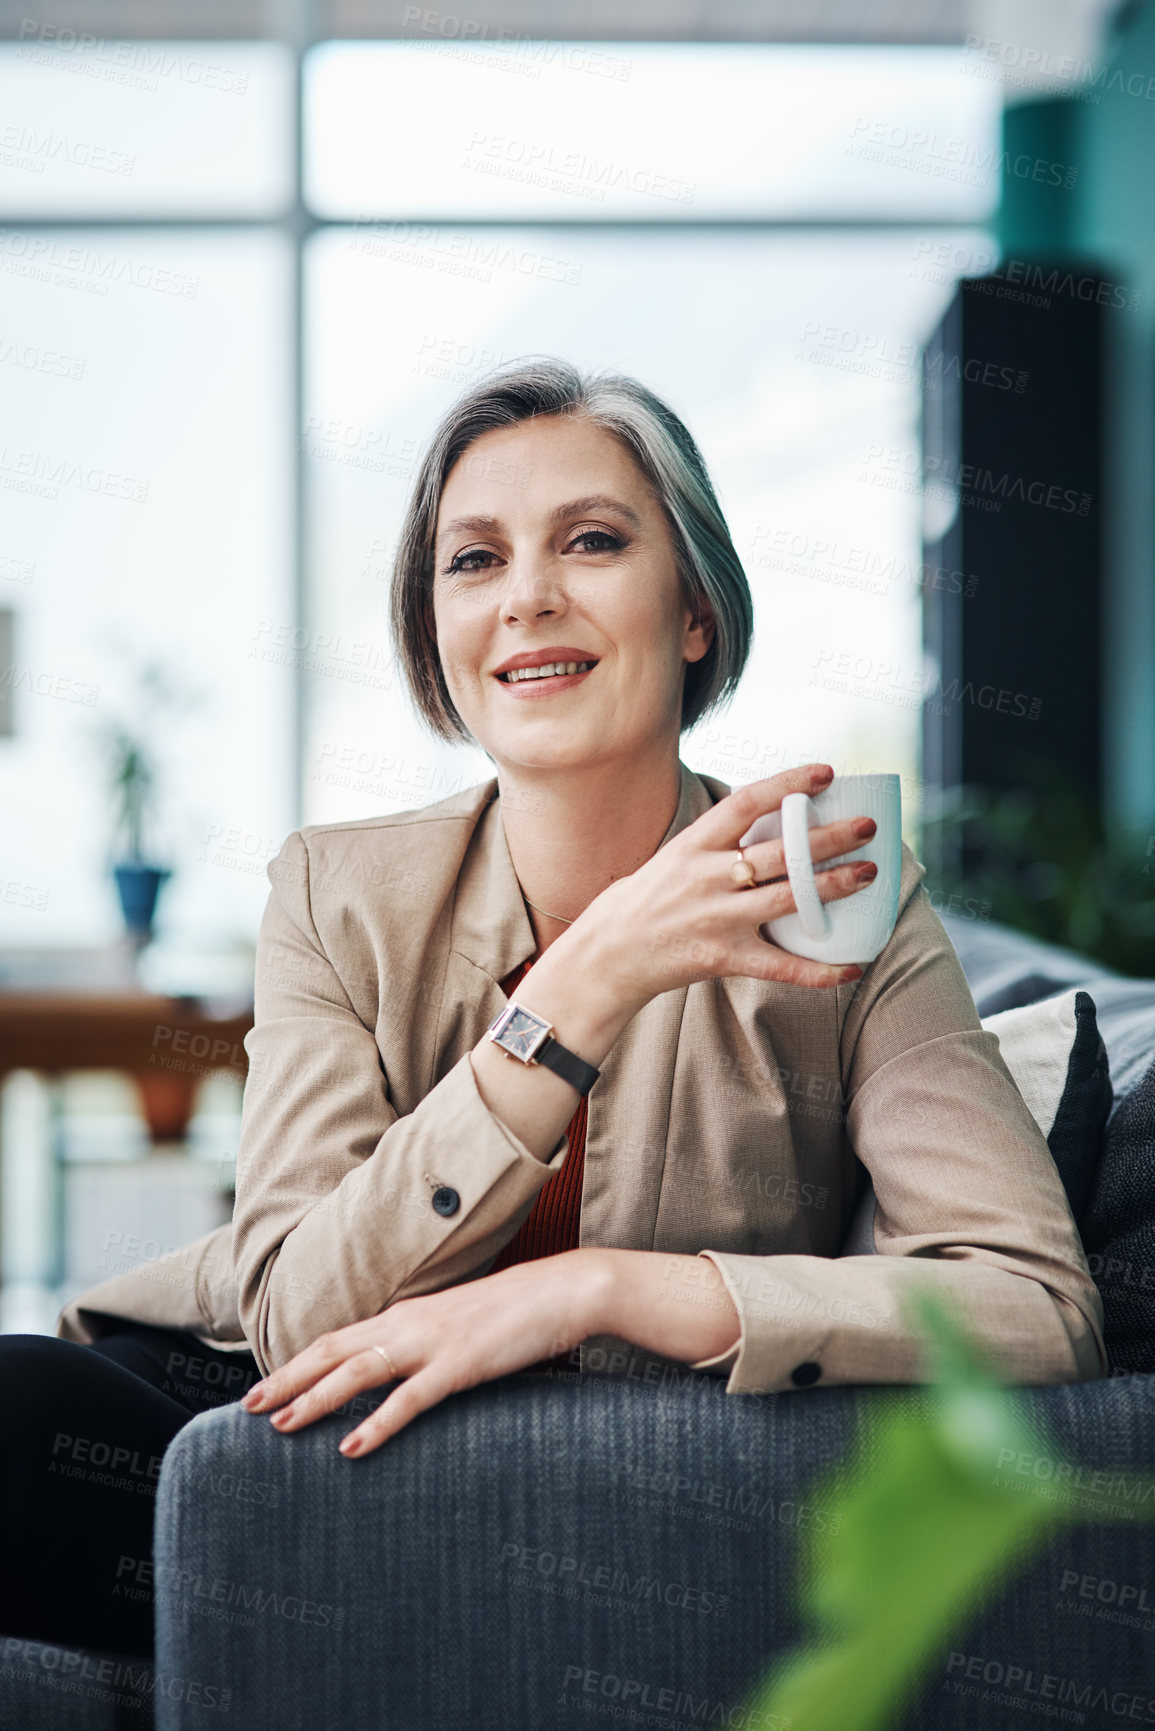 Buy stock photo Cropped portrait of an attractive mature businesswoman sitting alone and enjoying a cup of coffee in her home office